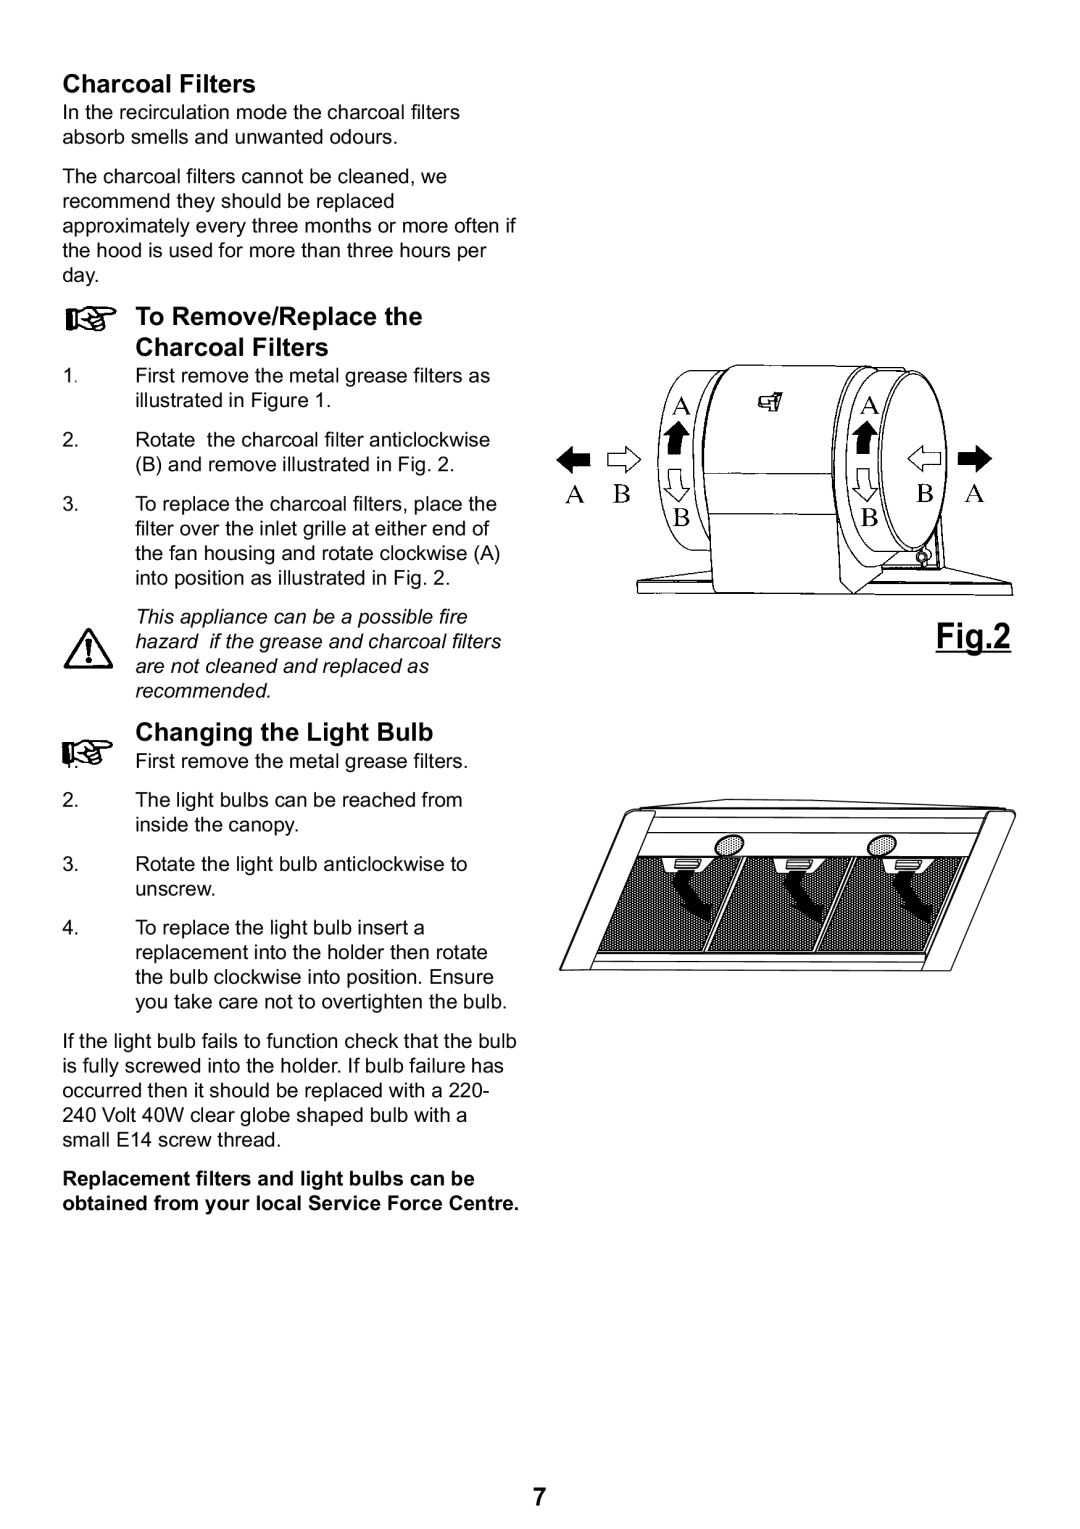 Electrolux EFC 935, EFC 635 manual To Remove/Replace the Charcoal Filters, Changing the Light Bulb, recommended 